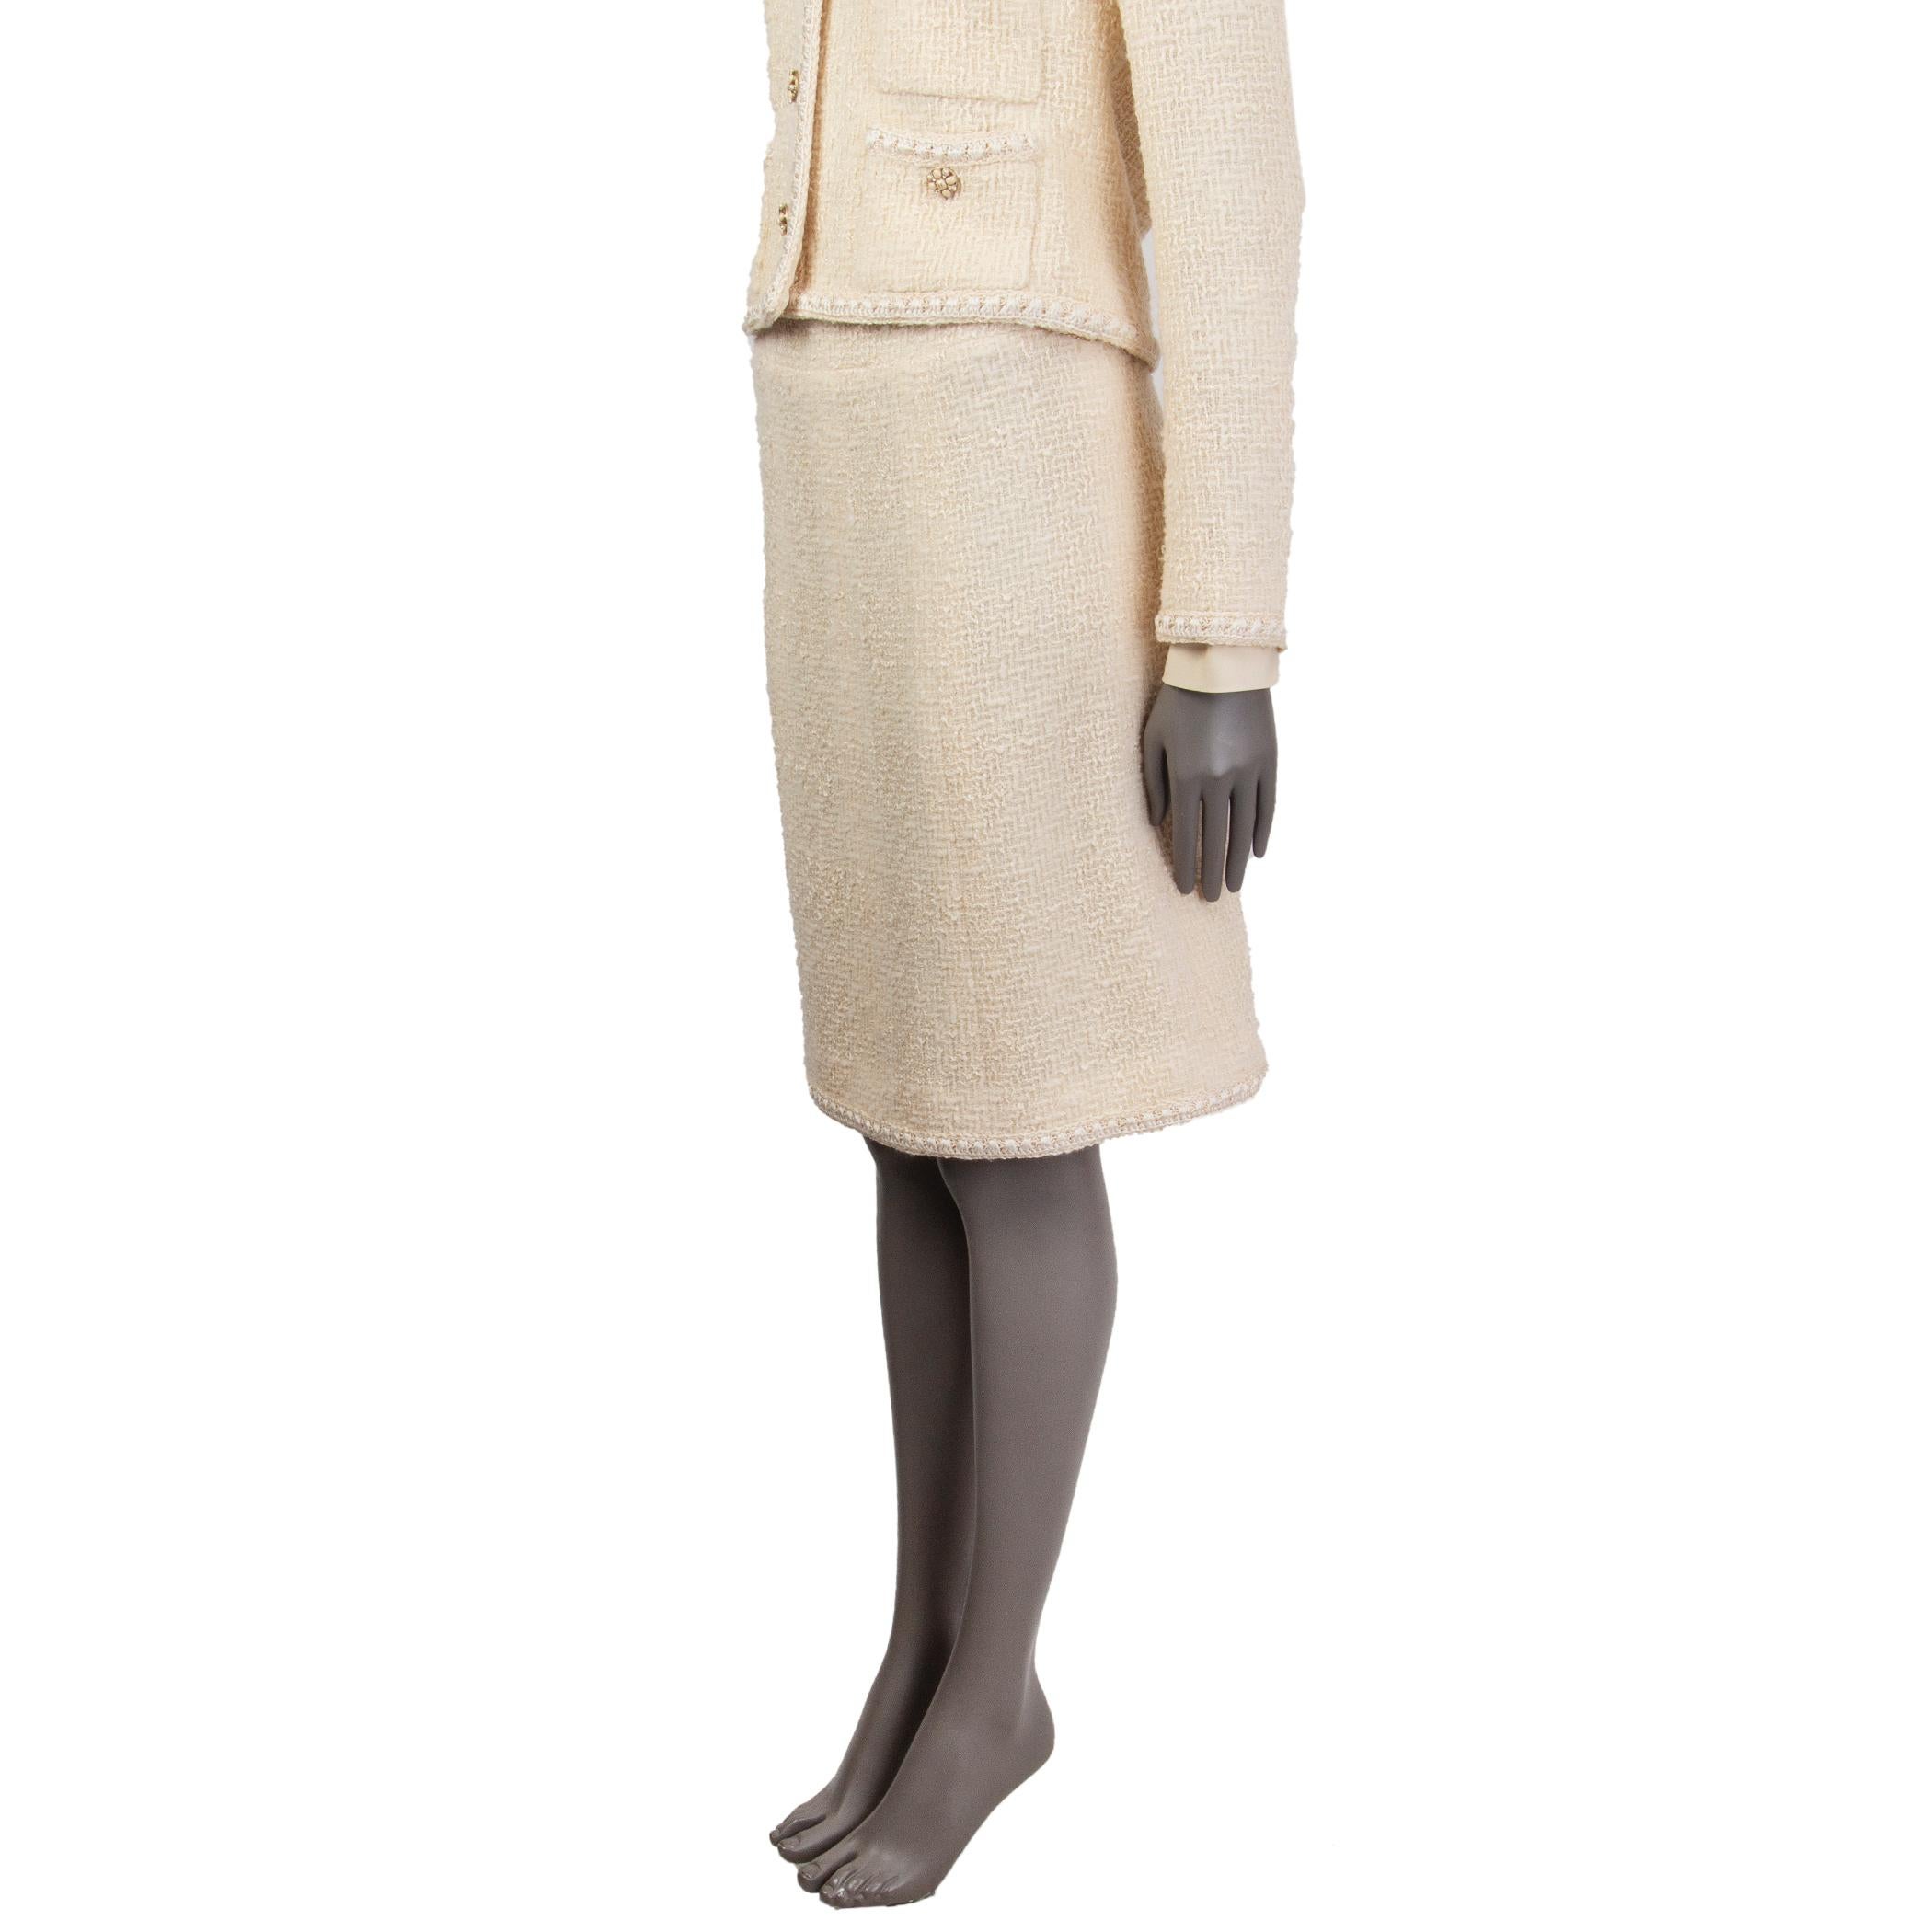 Chanel boucle skirt in cream and off-white wool (70%), silk (8%), mohair (8%), nylon (1%), and rayon (1%). With crochet trims. Closes with hook and invisible zipper on the back. Lined in cream silk (100%). Has been worn and is in excellent